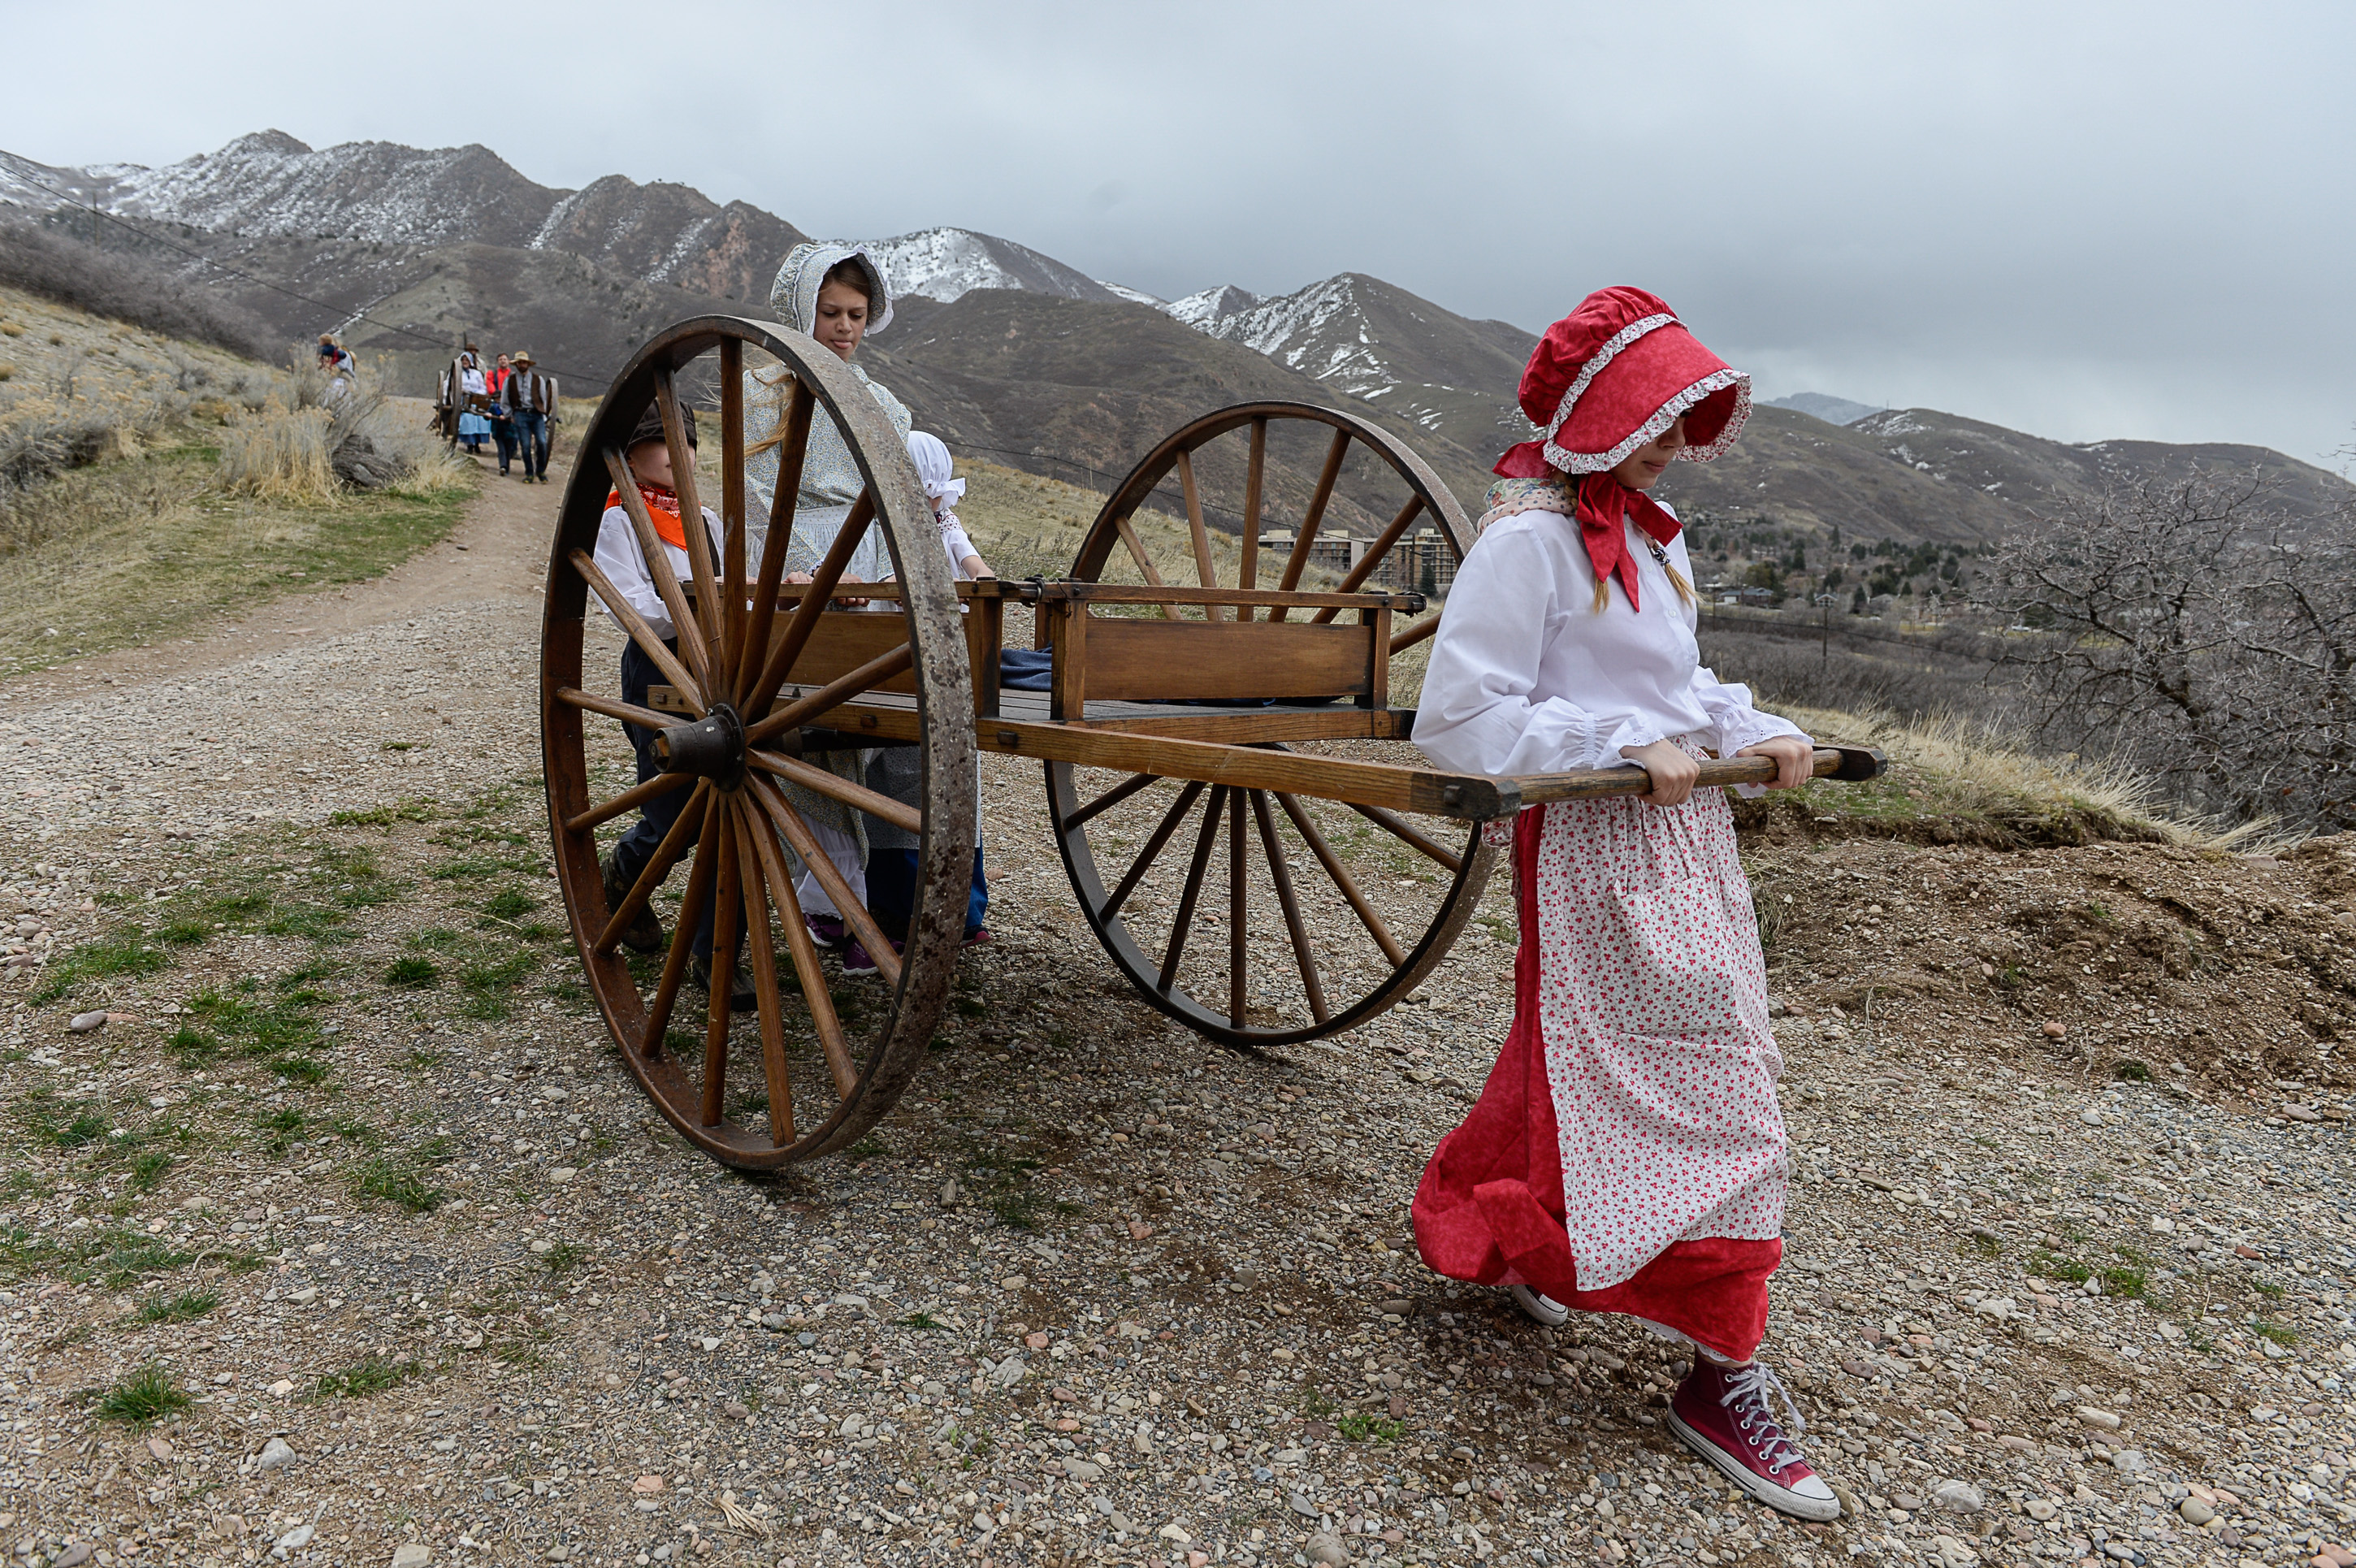 Treks give Mormon teens a taste of pioneer past, but some